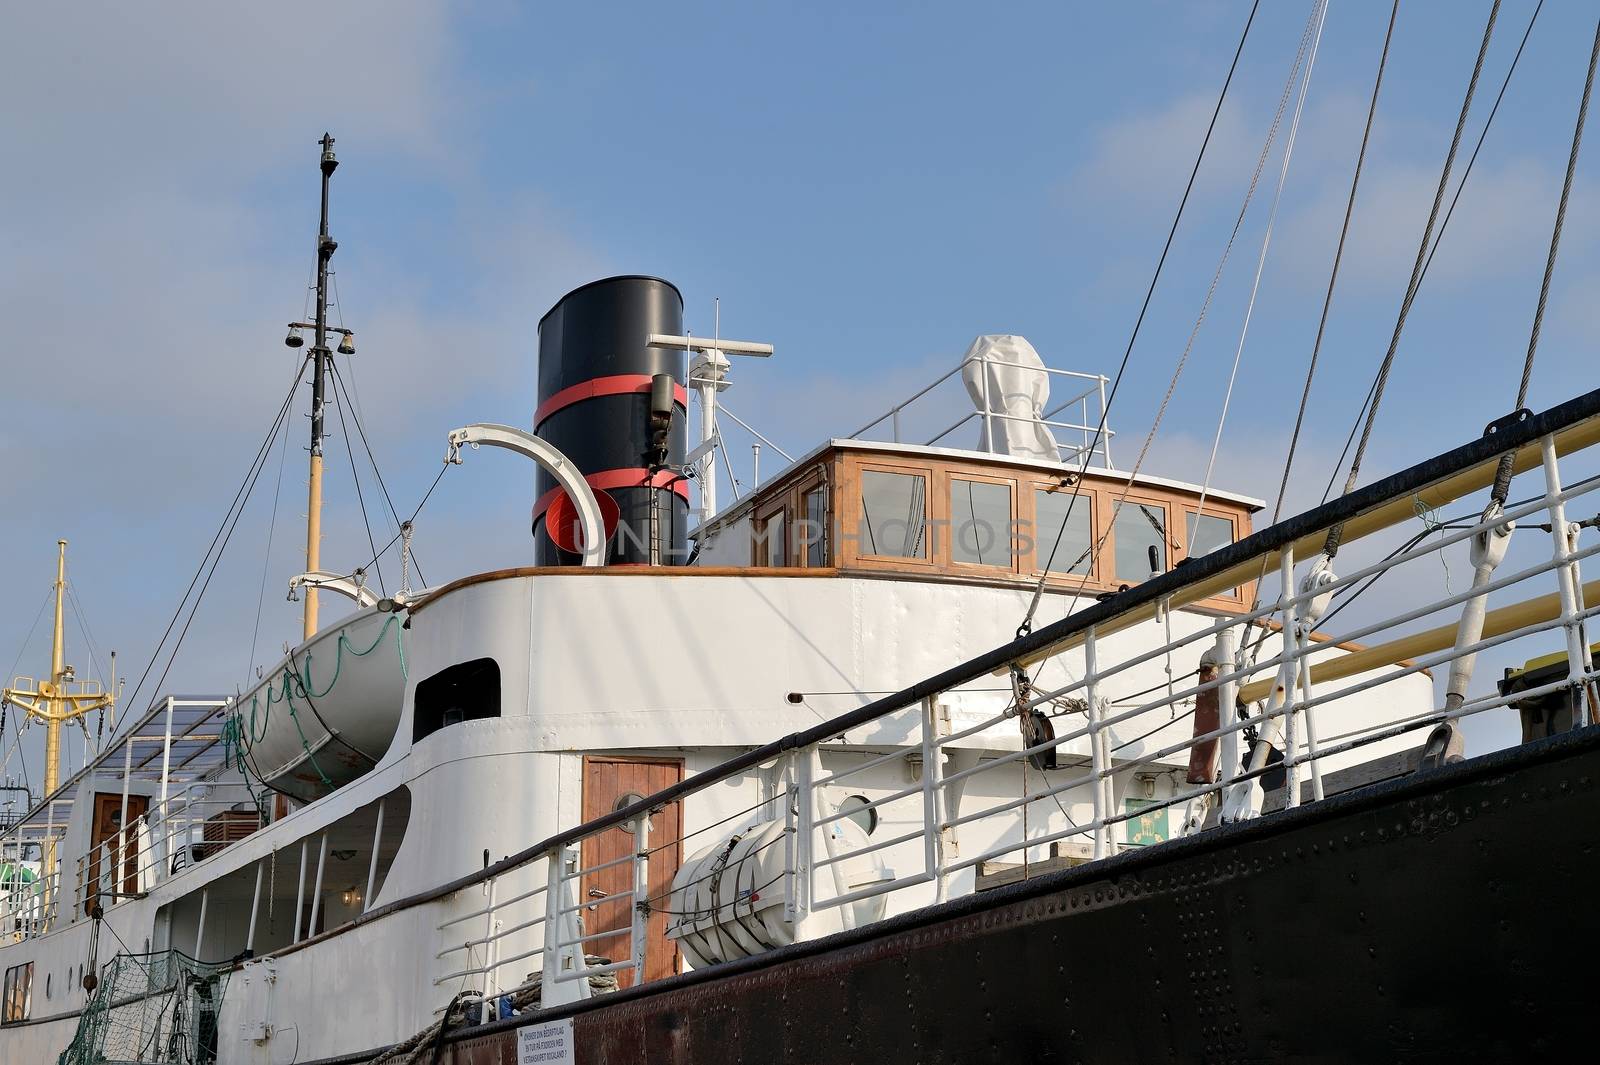 SS Rogaland Tourist Steam Ship Moored on the Quay in Stavanger Harbour Norway